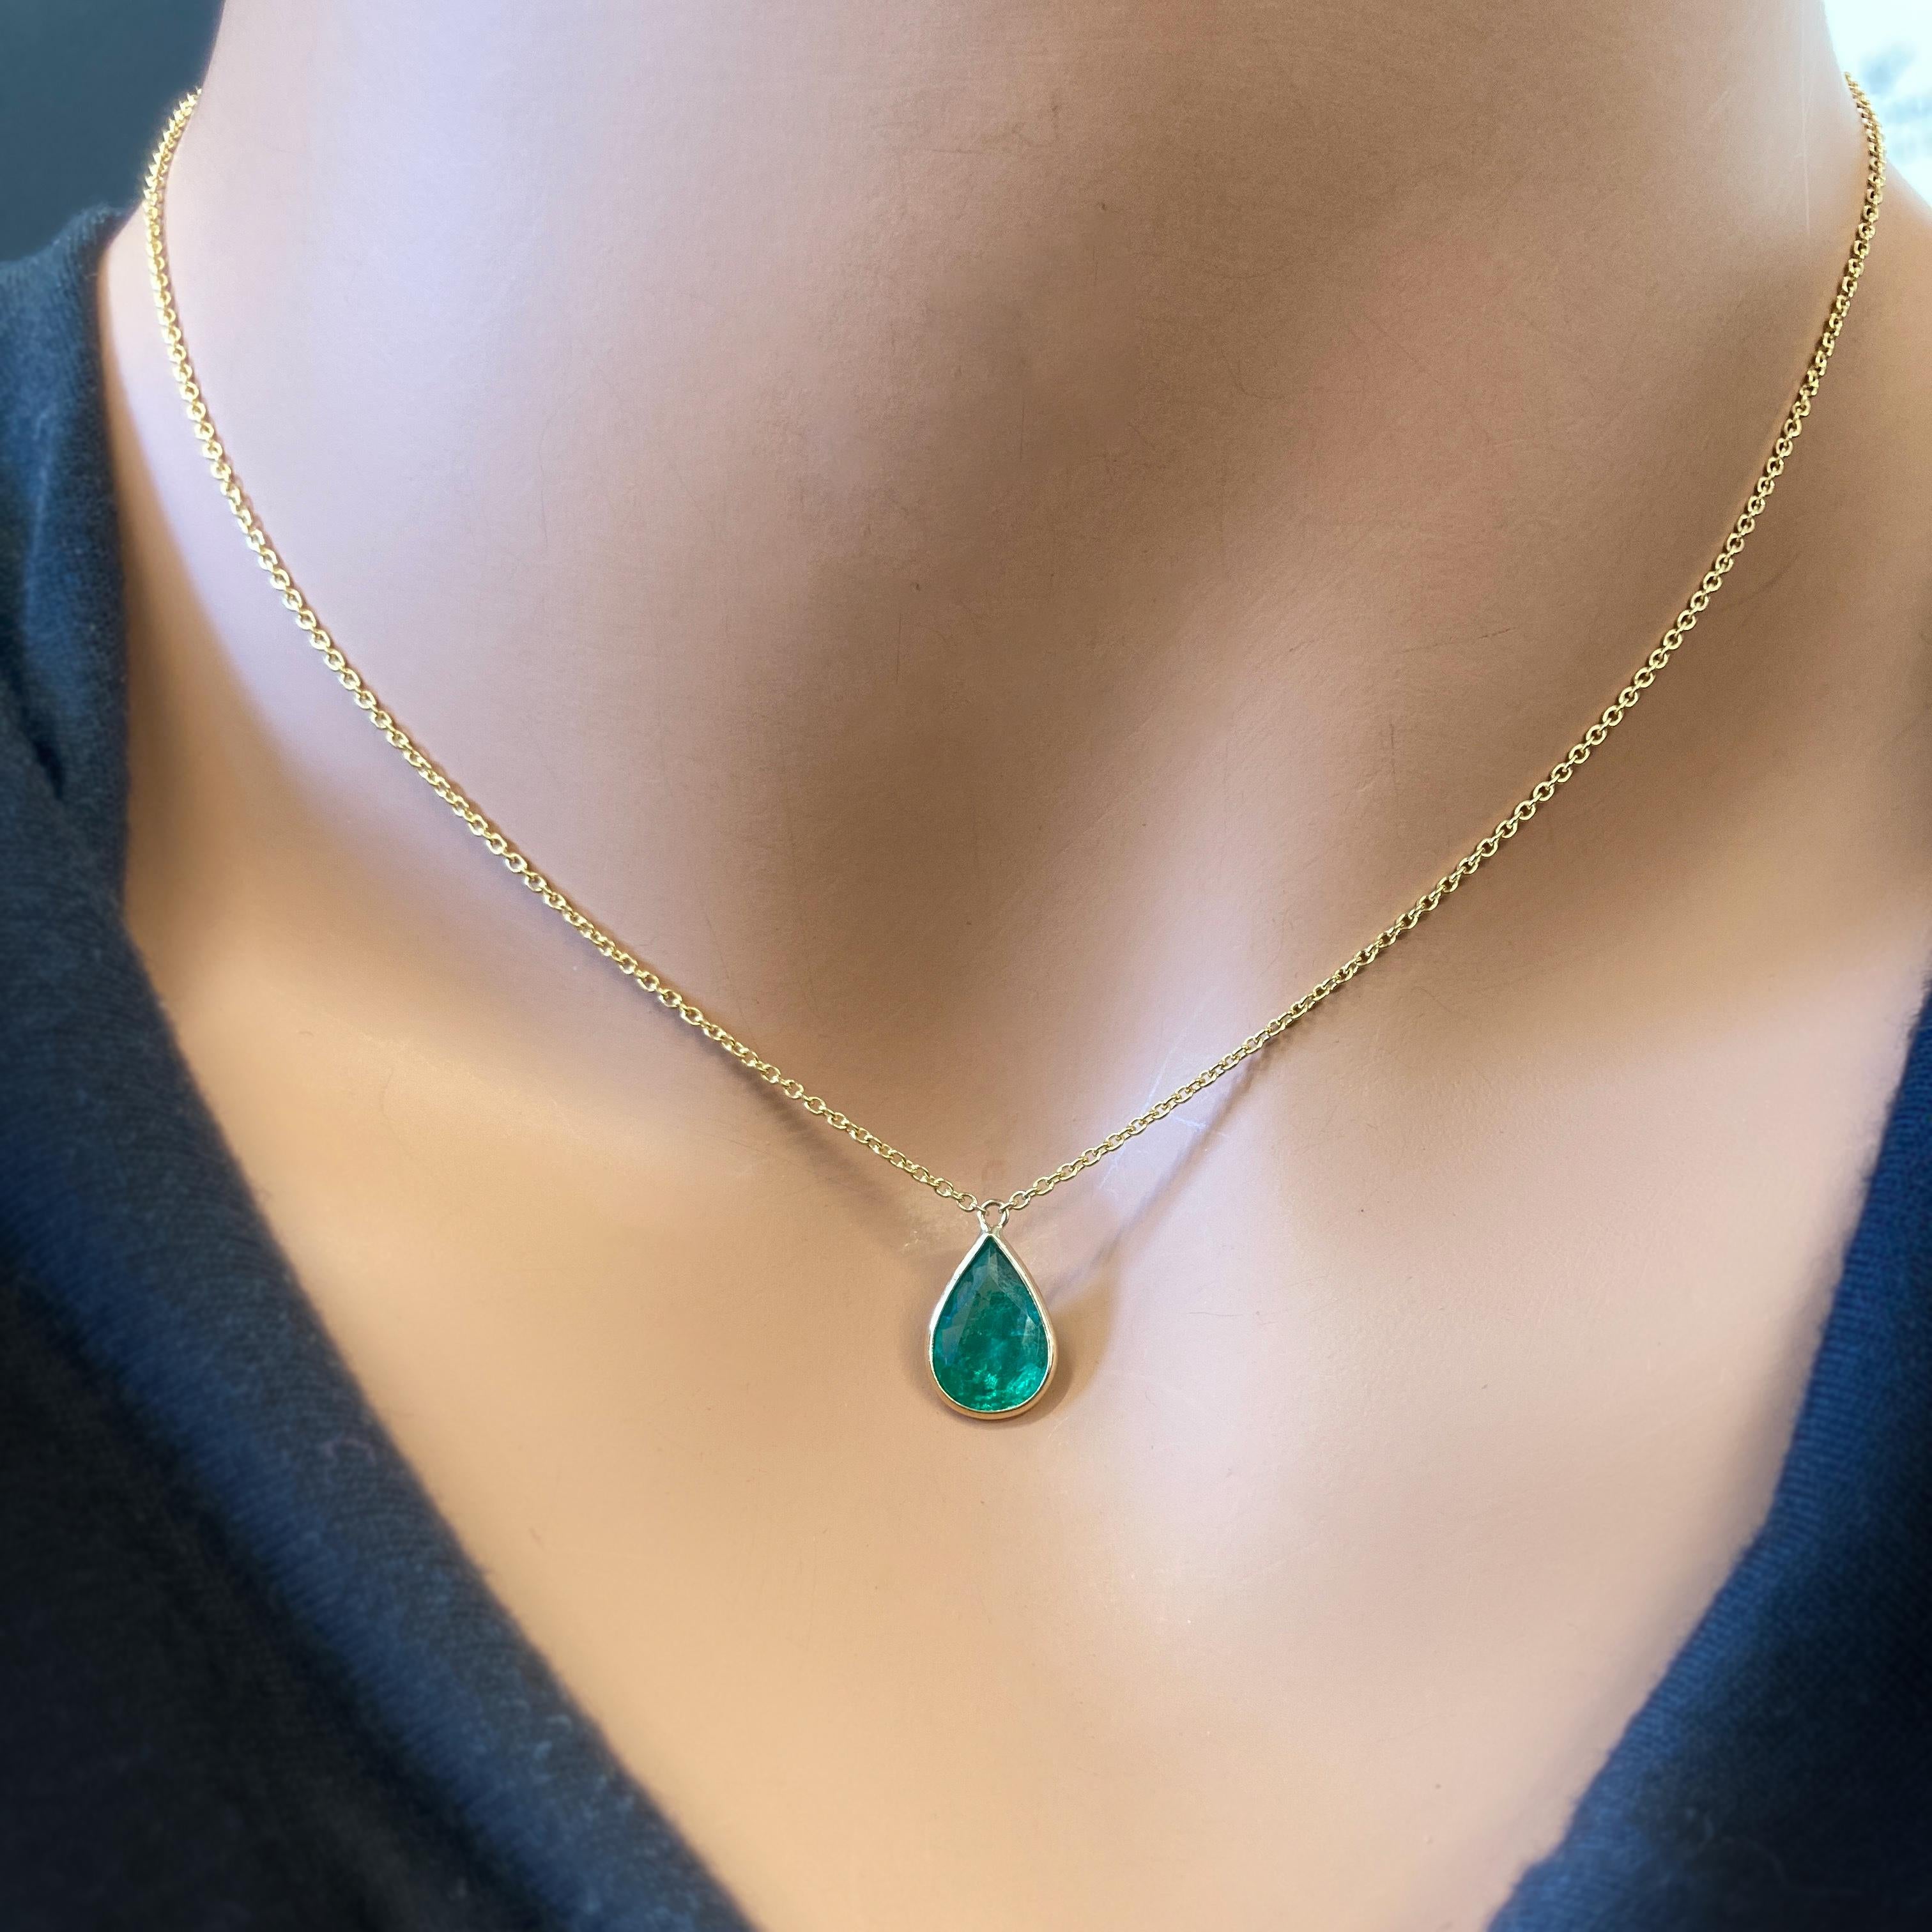 This necklace features a pear-cut green emerald with a weight of 1.91 carats, set in 14k yellow gold (YG). Emeralds are highly prized for their rich green color, and the pear cut, with its distinctive teardrop shape, adds an elegant and unique touch